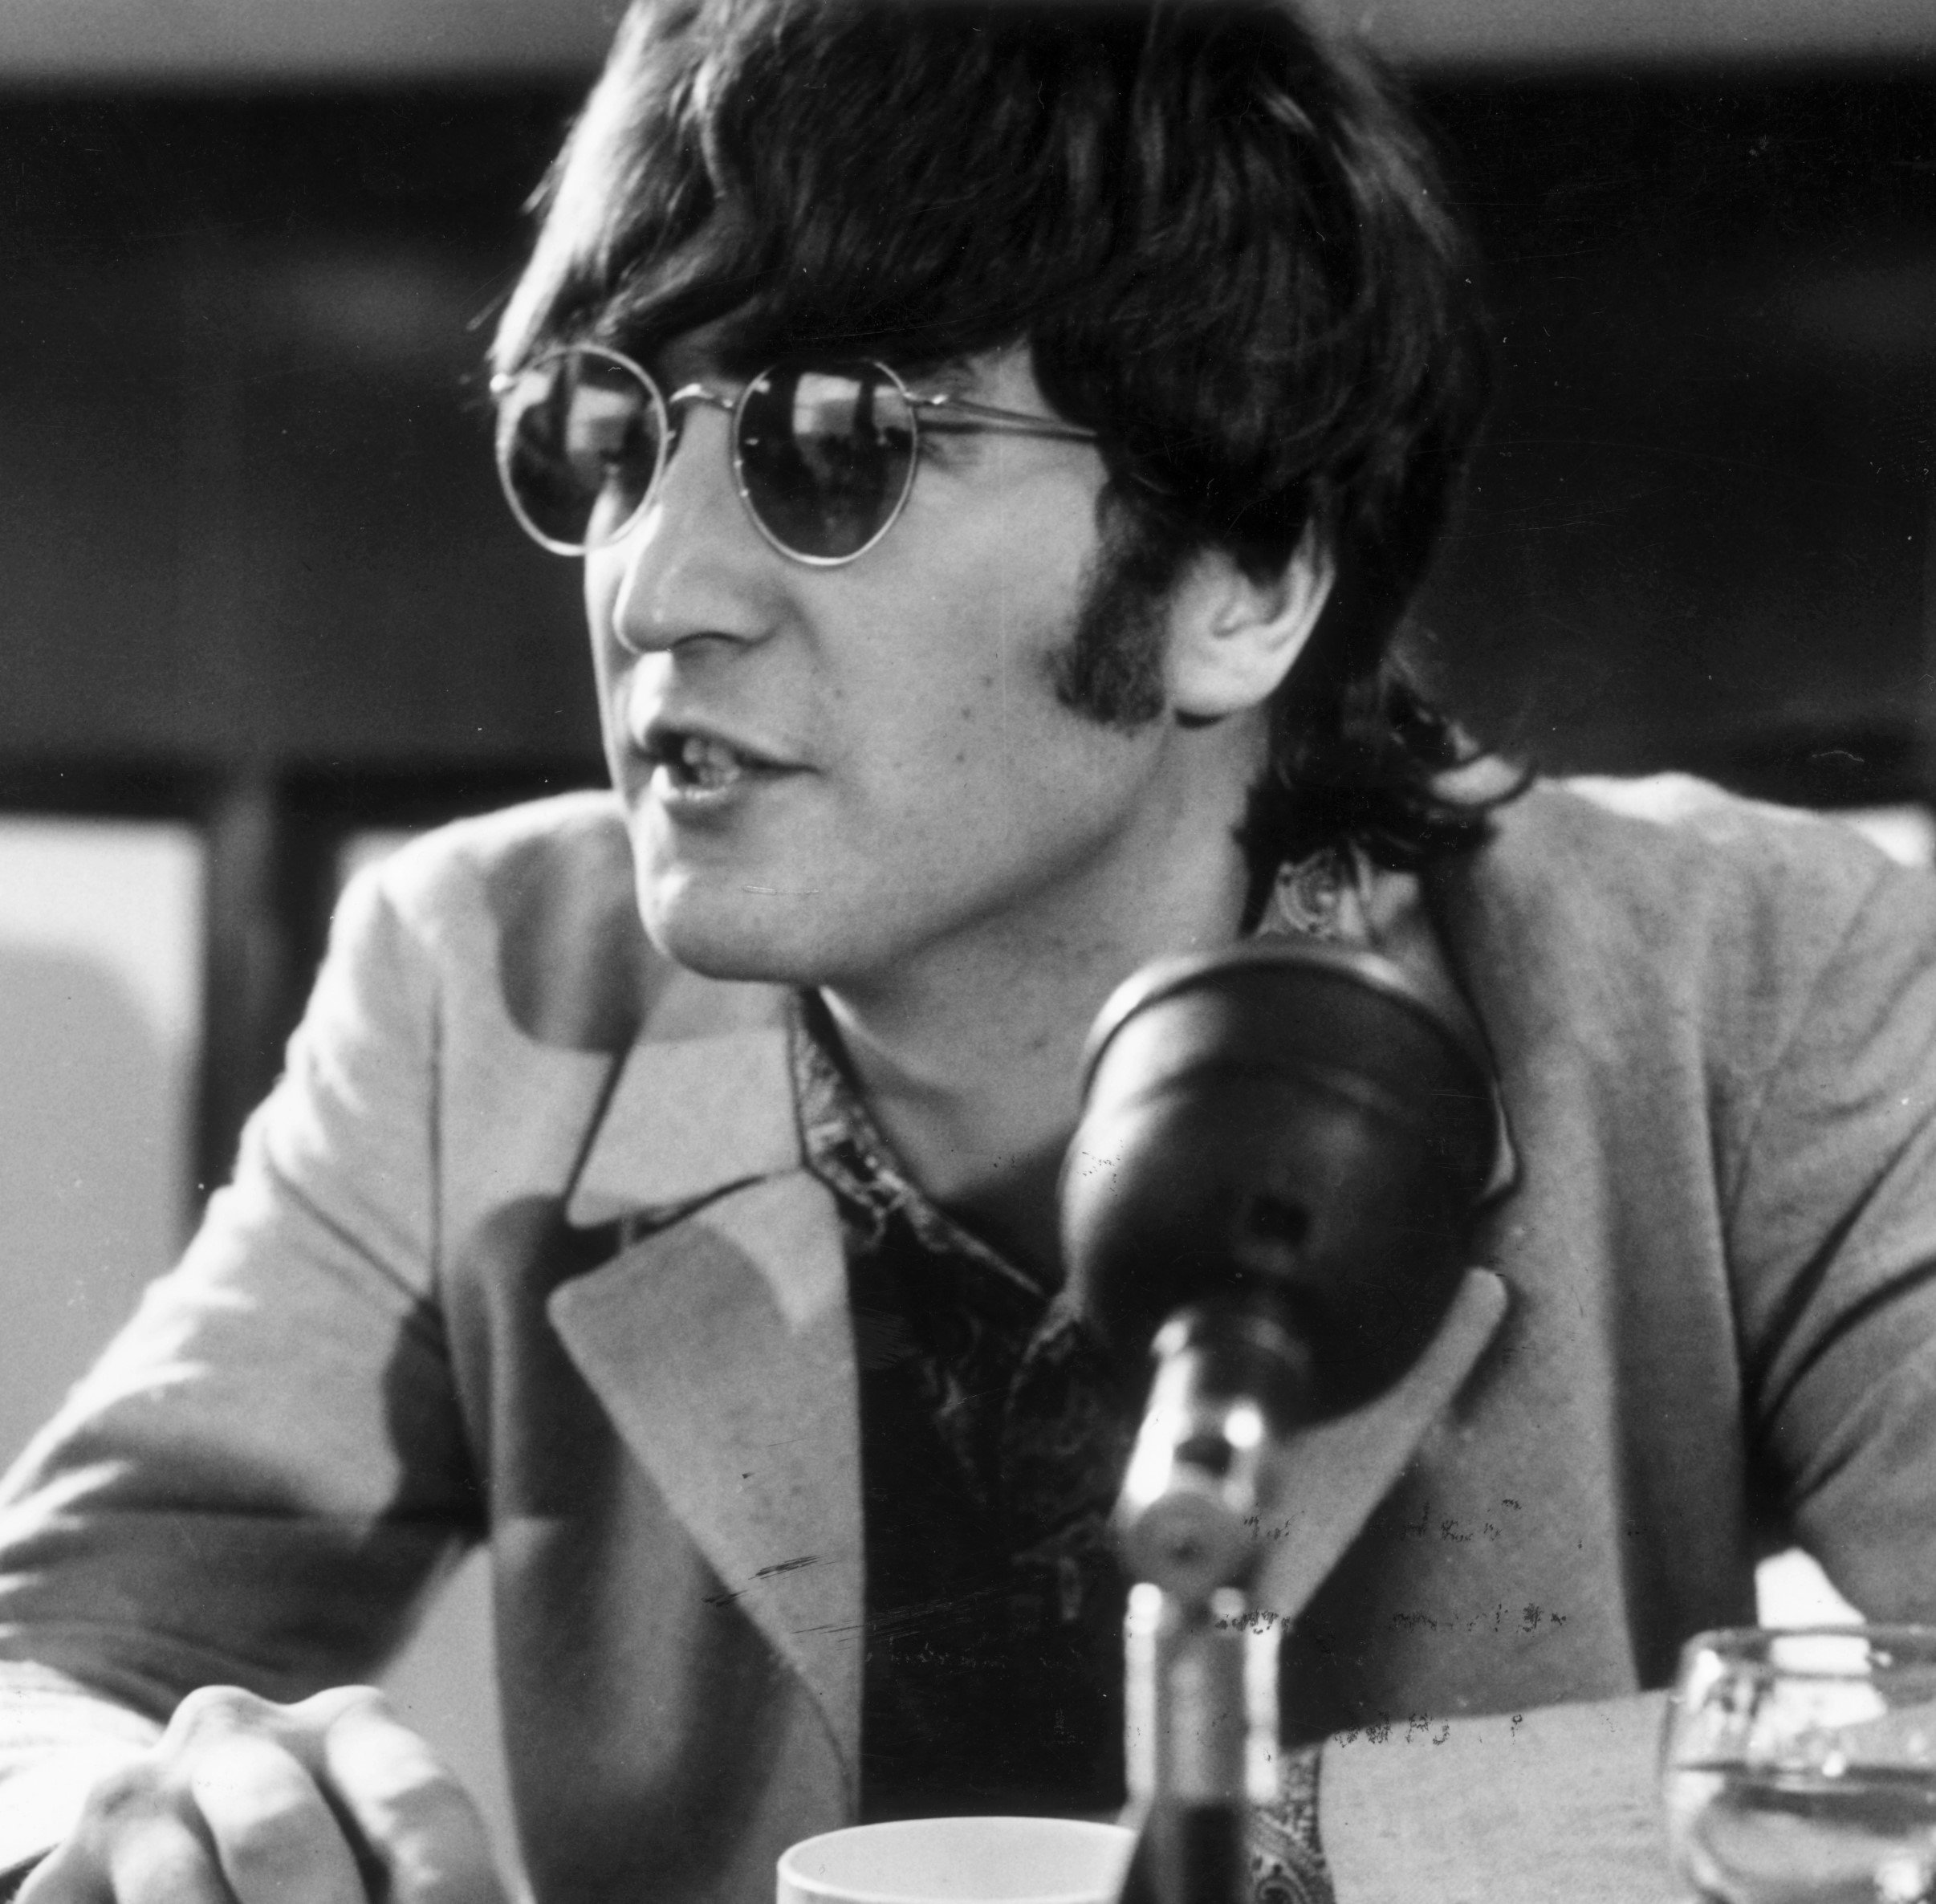 John Lennon Joked He’d Get an Award for The Beatles’ ‘Yesterday’ Even Though He Didn’t Write It